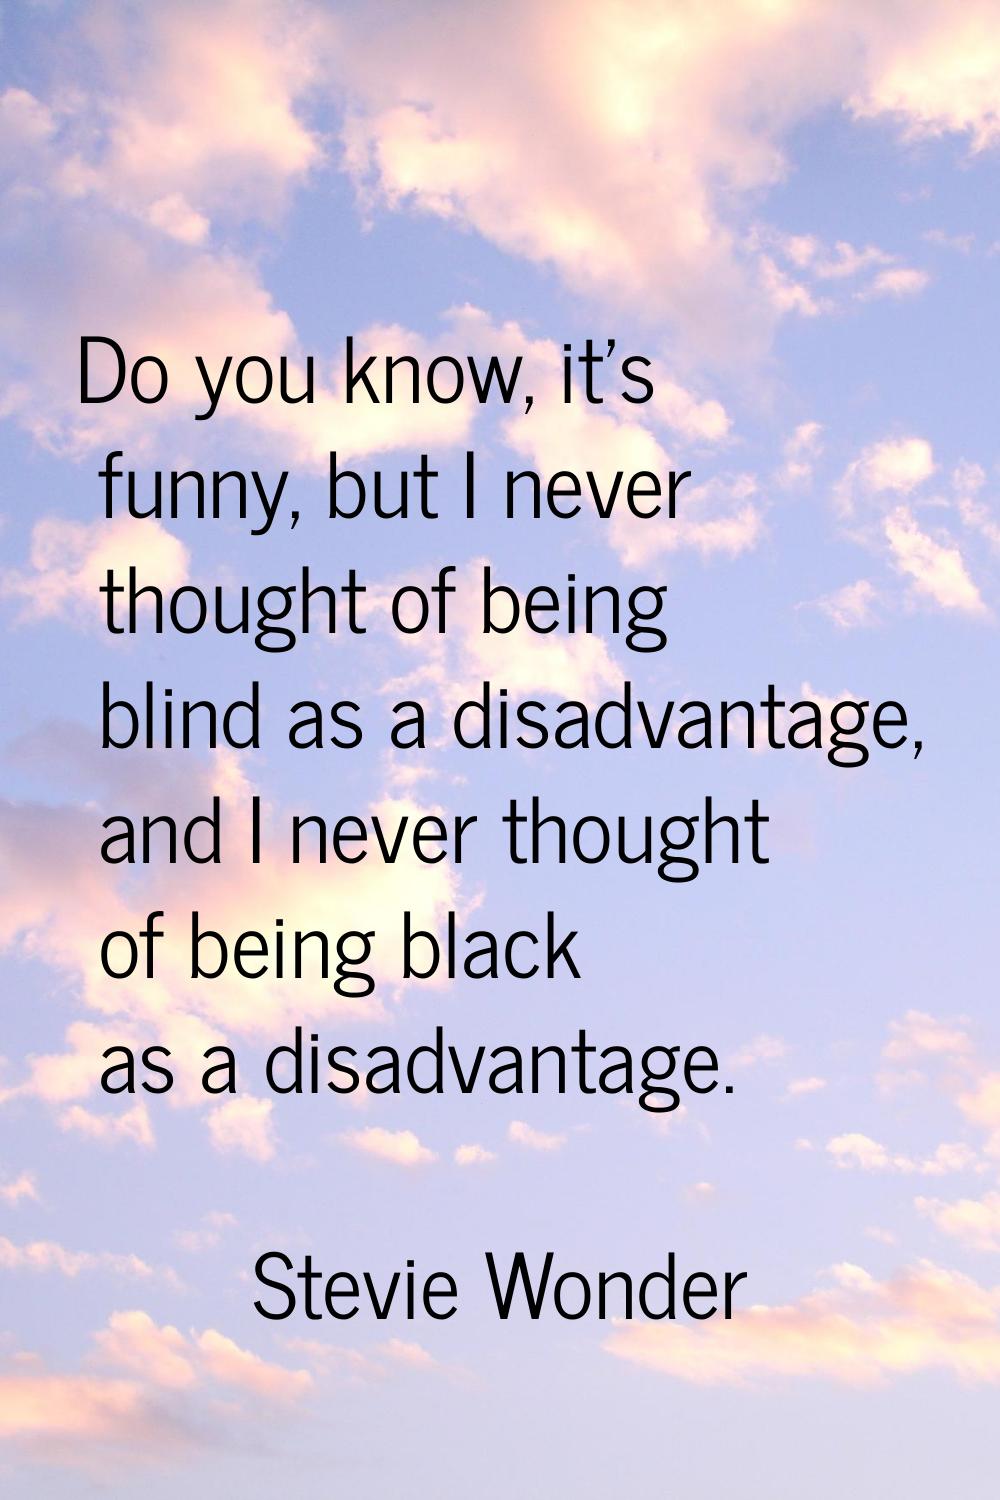 Do you know, it's funny, but I never thought of being blind as a disadvantage, and I never thought 